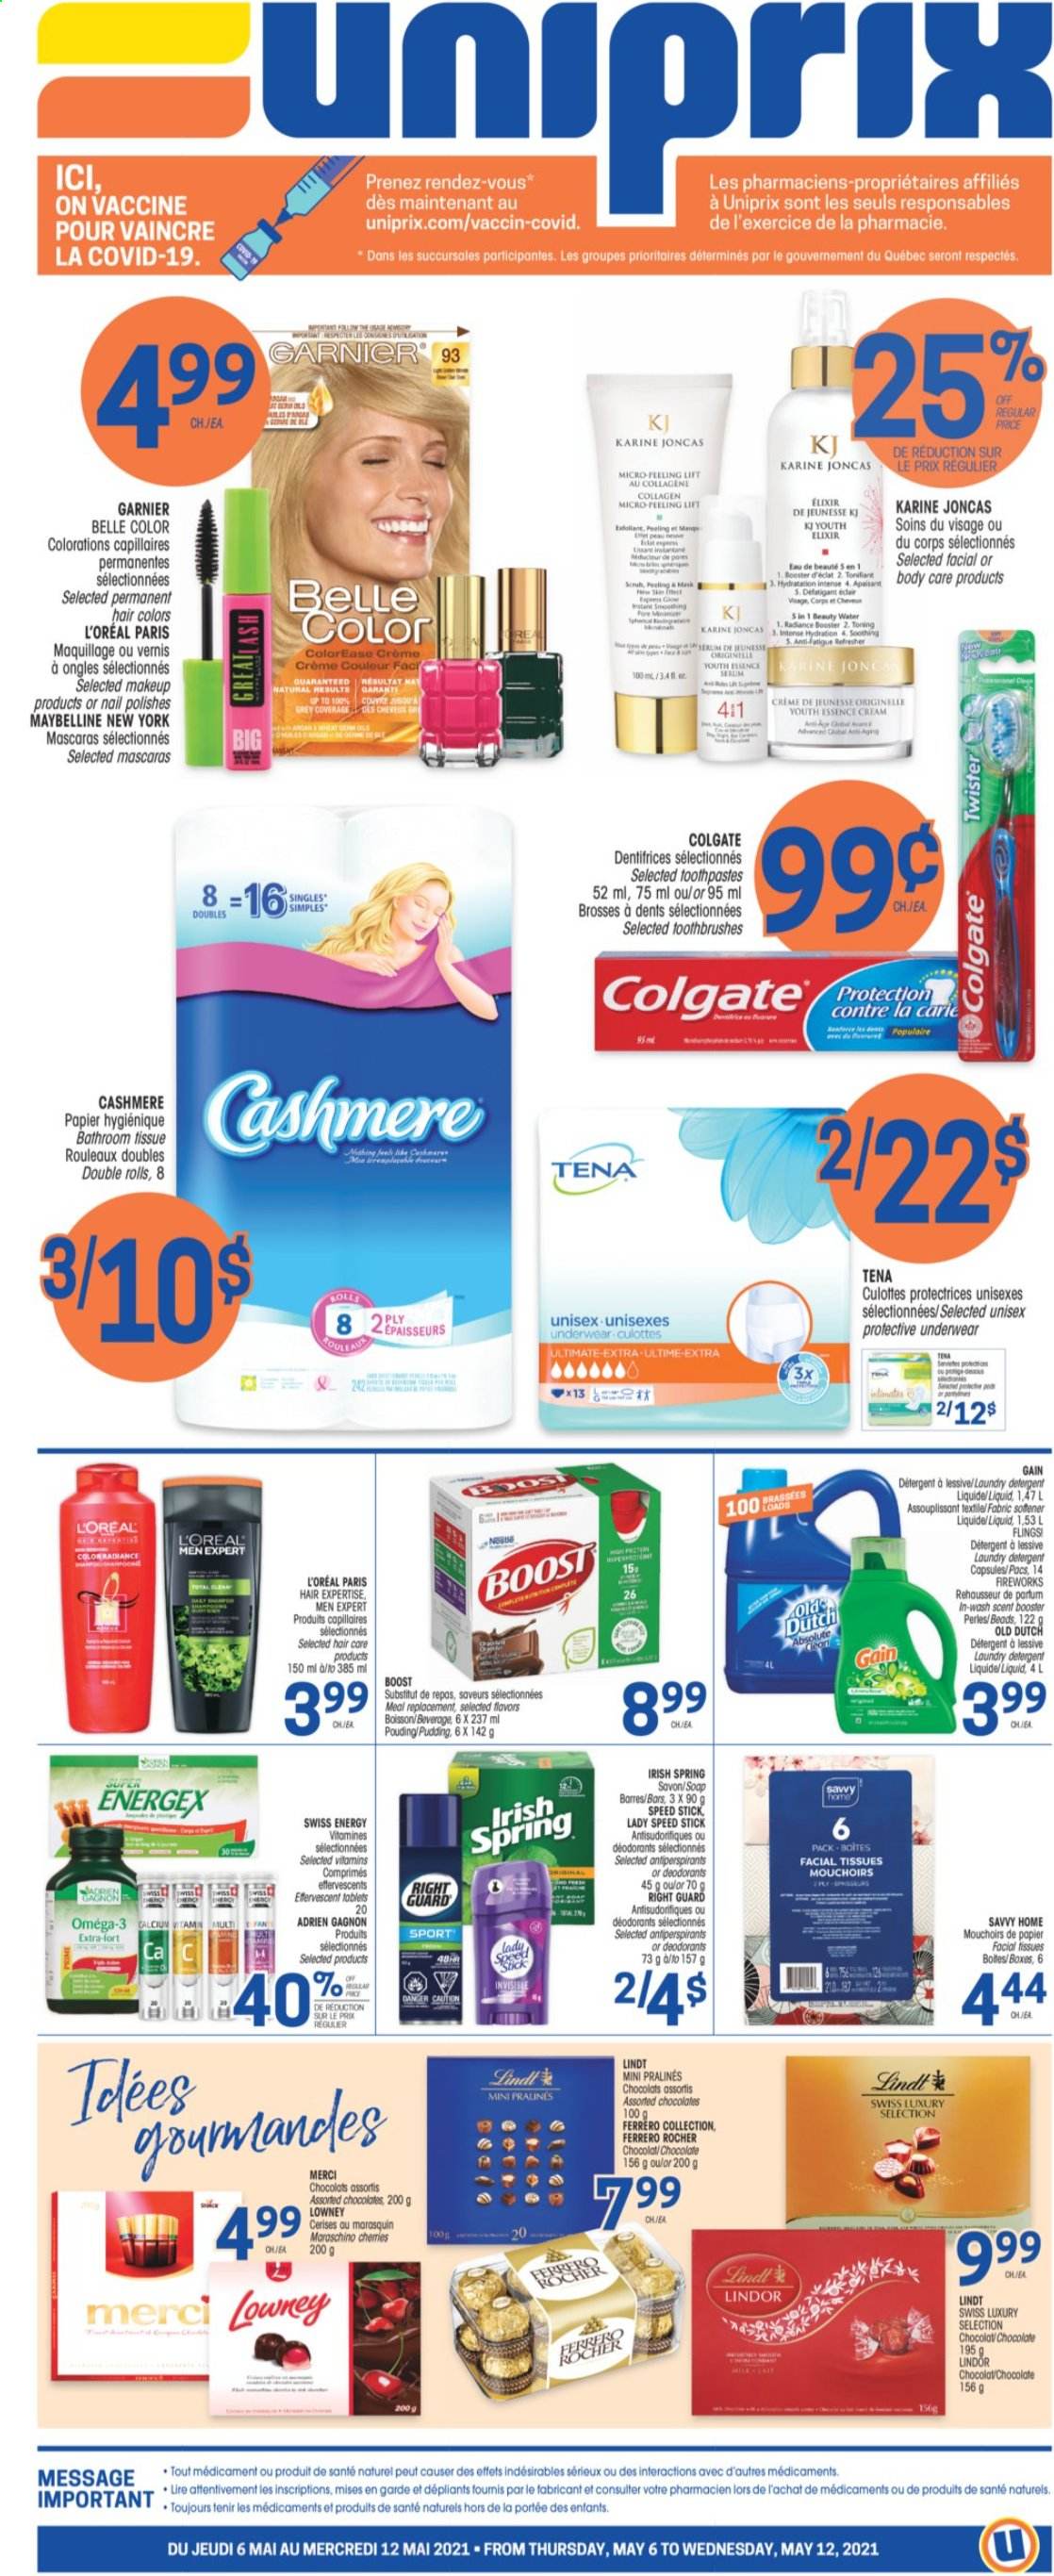 thumbnail - Uniprix Flyer - May 06, 2021 - May 12, 2021 - Sales products - chocolate, Merci, Boost, bath tissue, Gain, fabric softener, laundry detergent, soap, facial tissues, L’Oréal, L’Oréal Men, refresher, Speed Stick, makeup, Omega-3, Garnier, Maybelline, Twister, deodorant. Page 1.